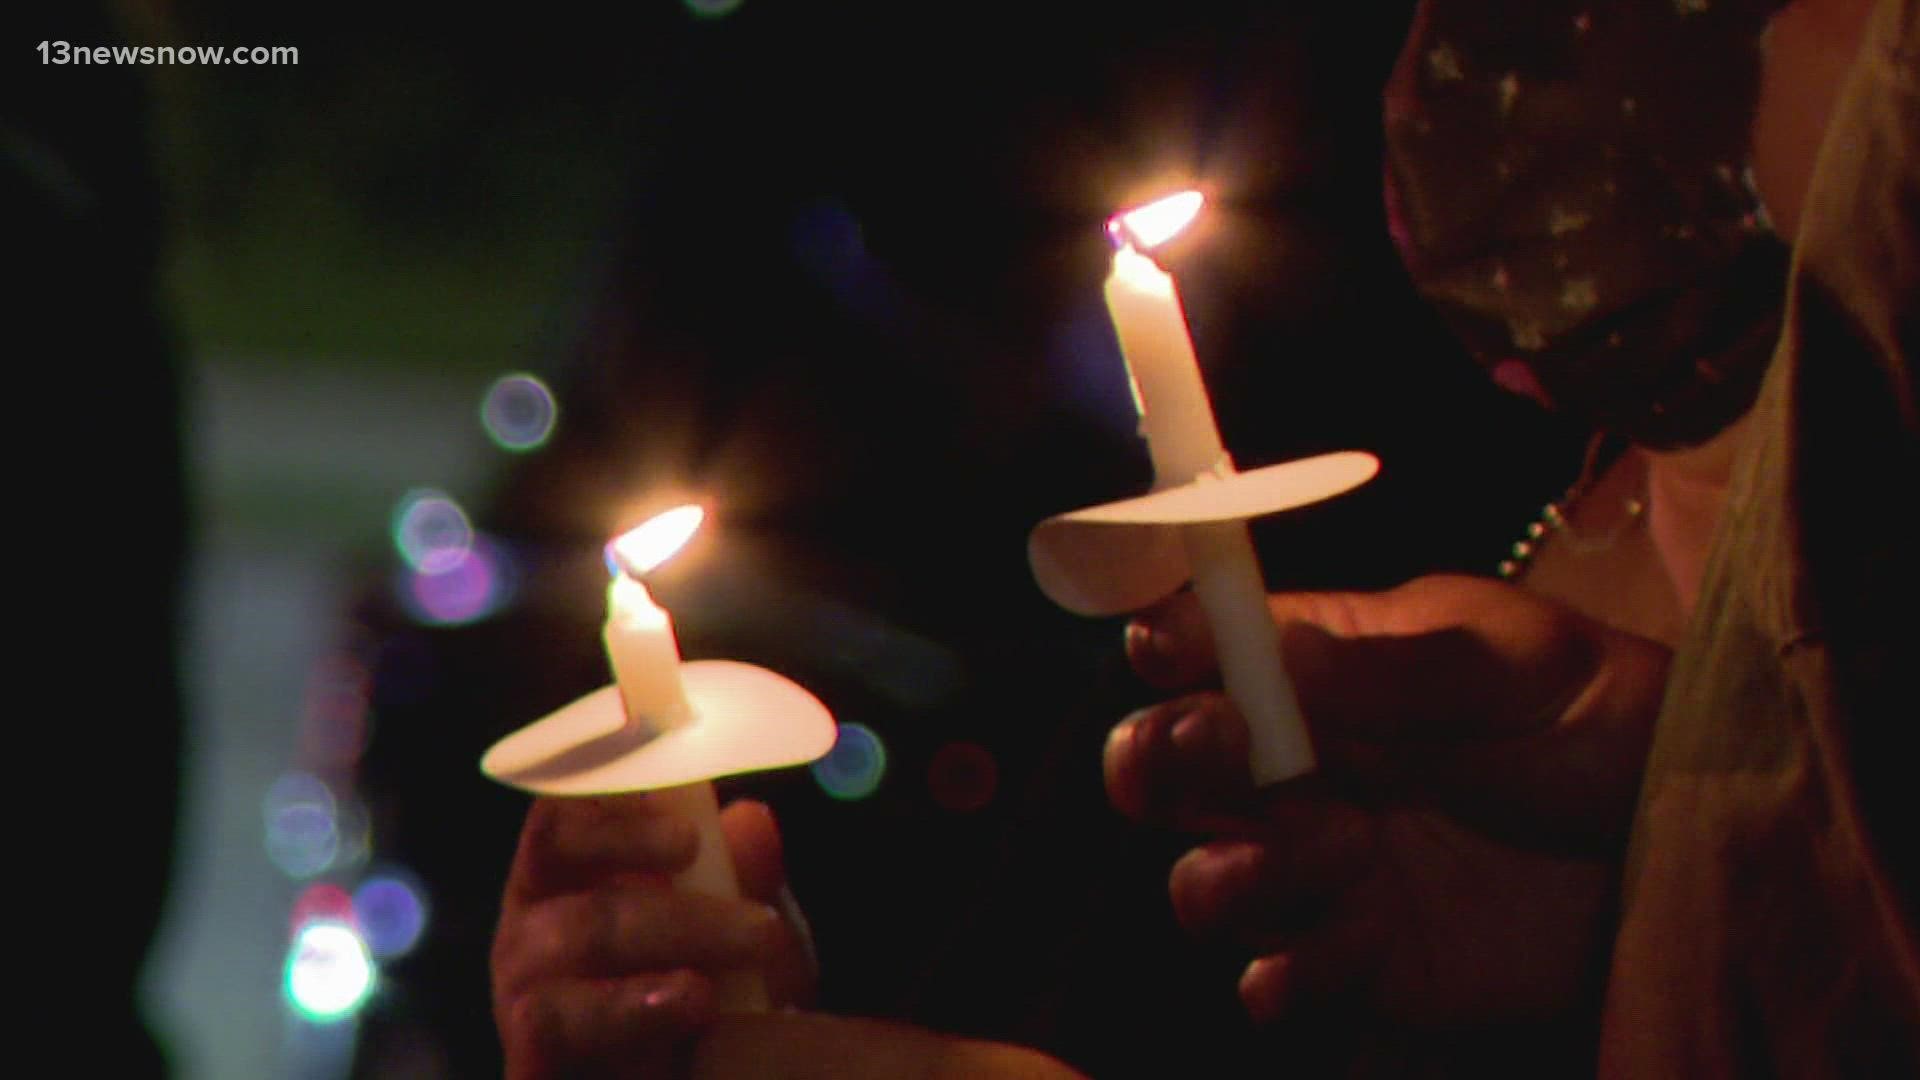 Funeral homes full, candles lit for those killed in mall shooting